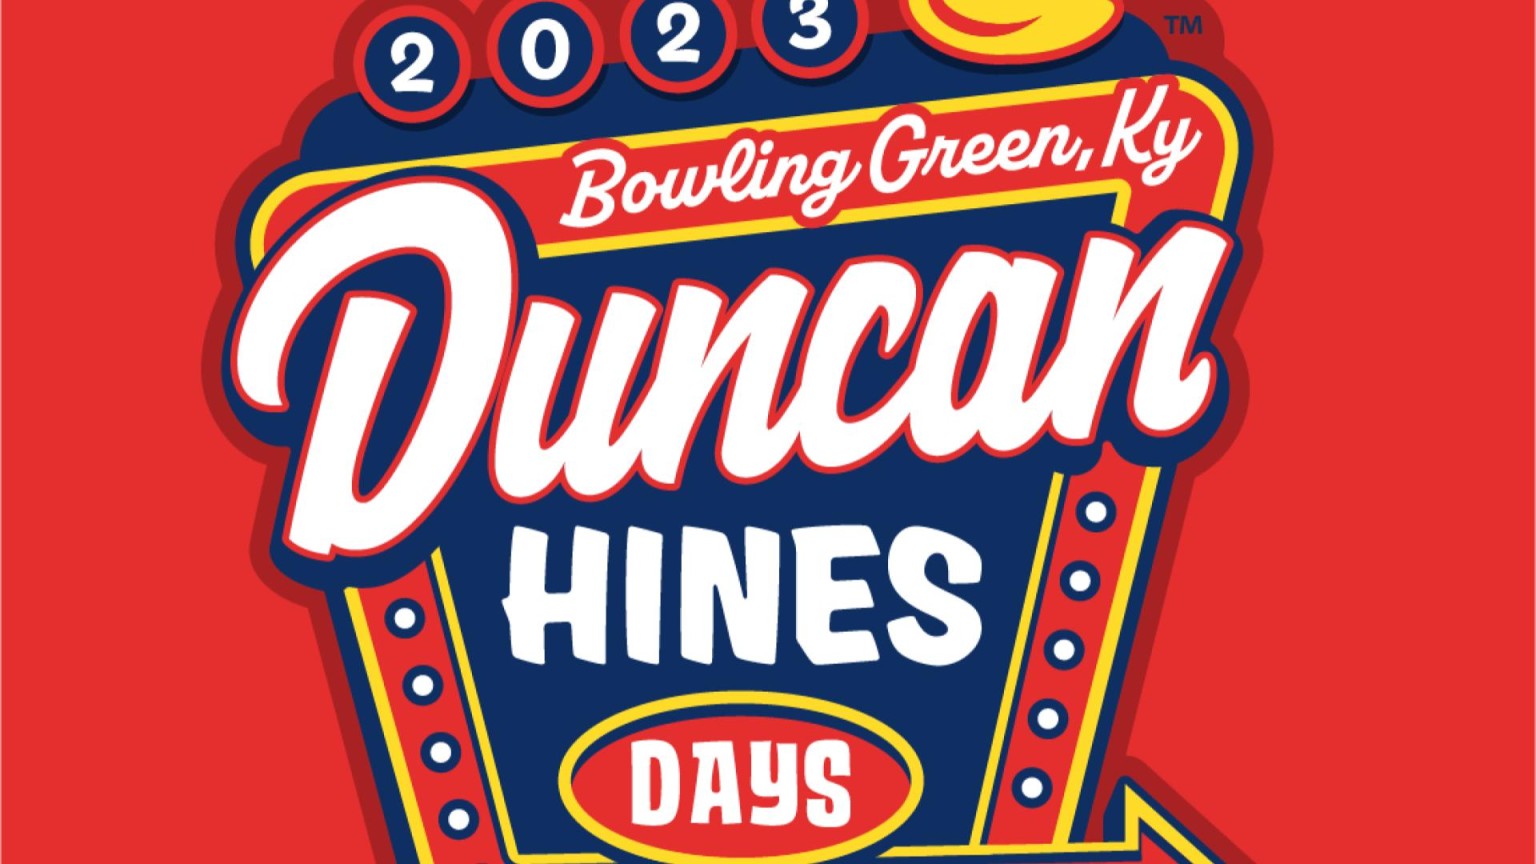 Duncan Hines Days to return to Bowling Green WNKY News 40 Television